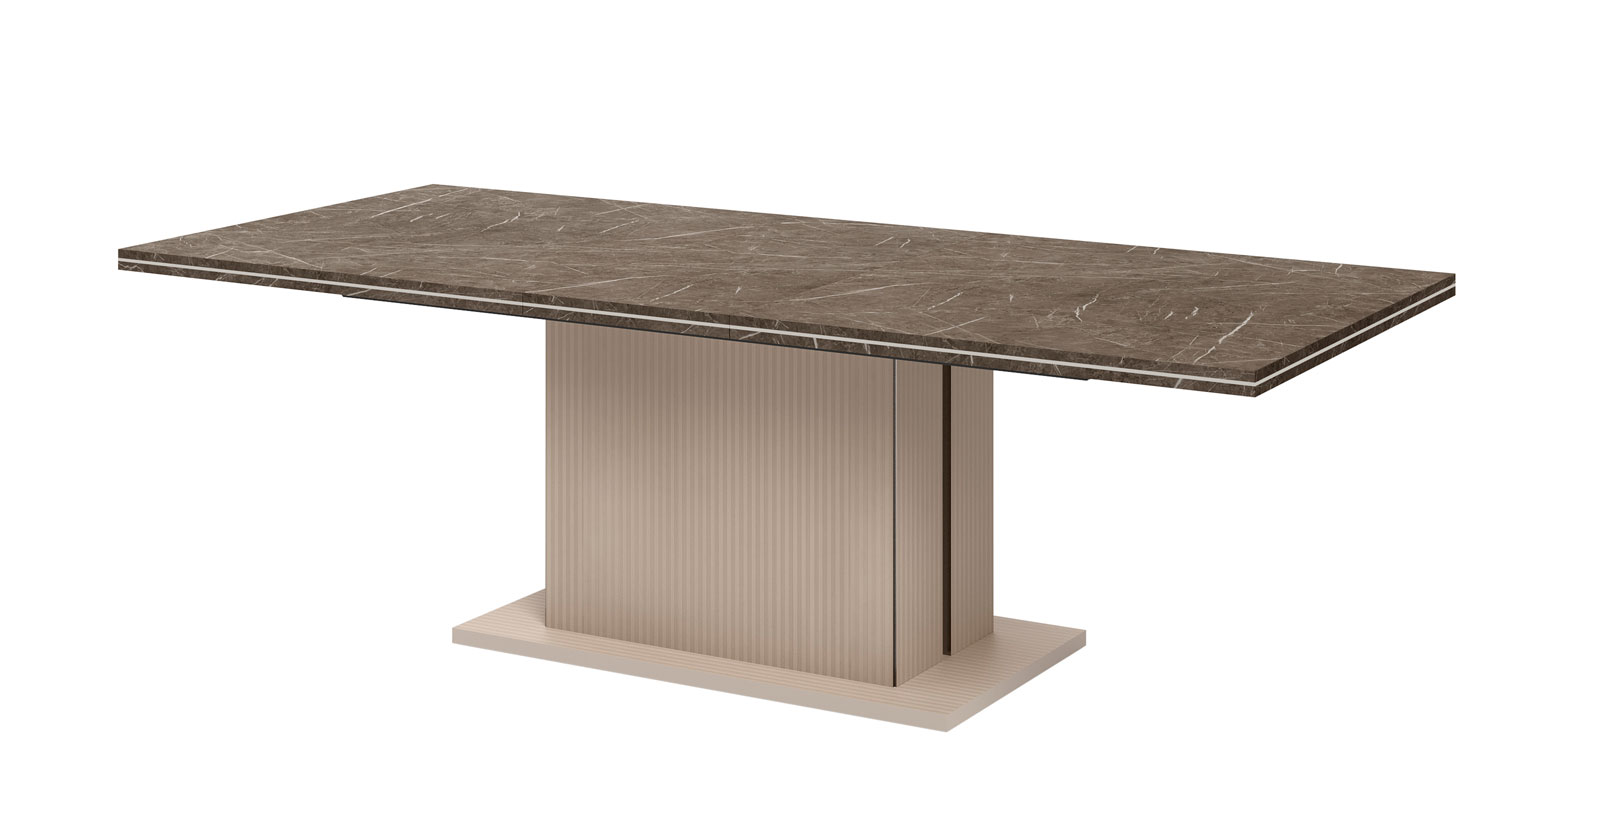 Brands Garcia Laurel & Hardy Tables Fidia- Aris Dining table